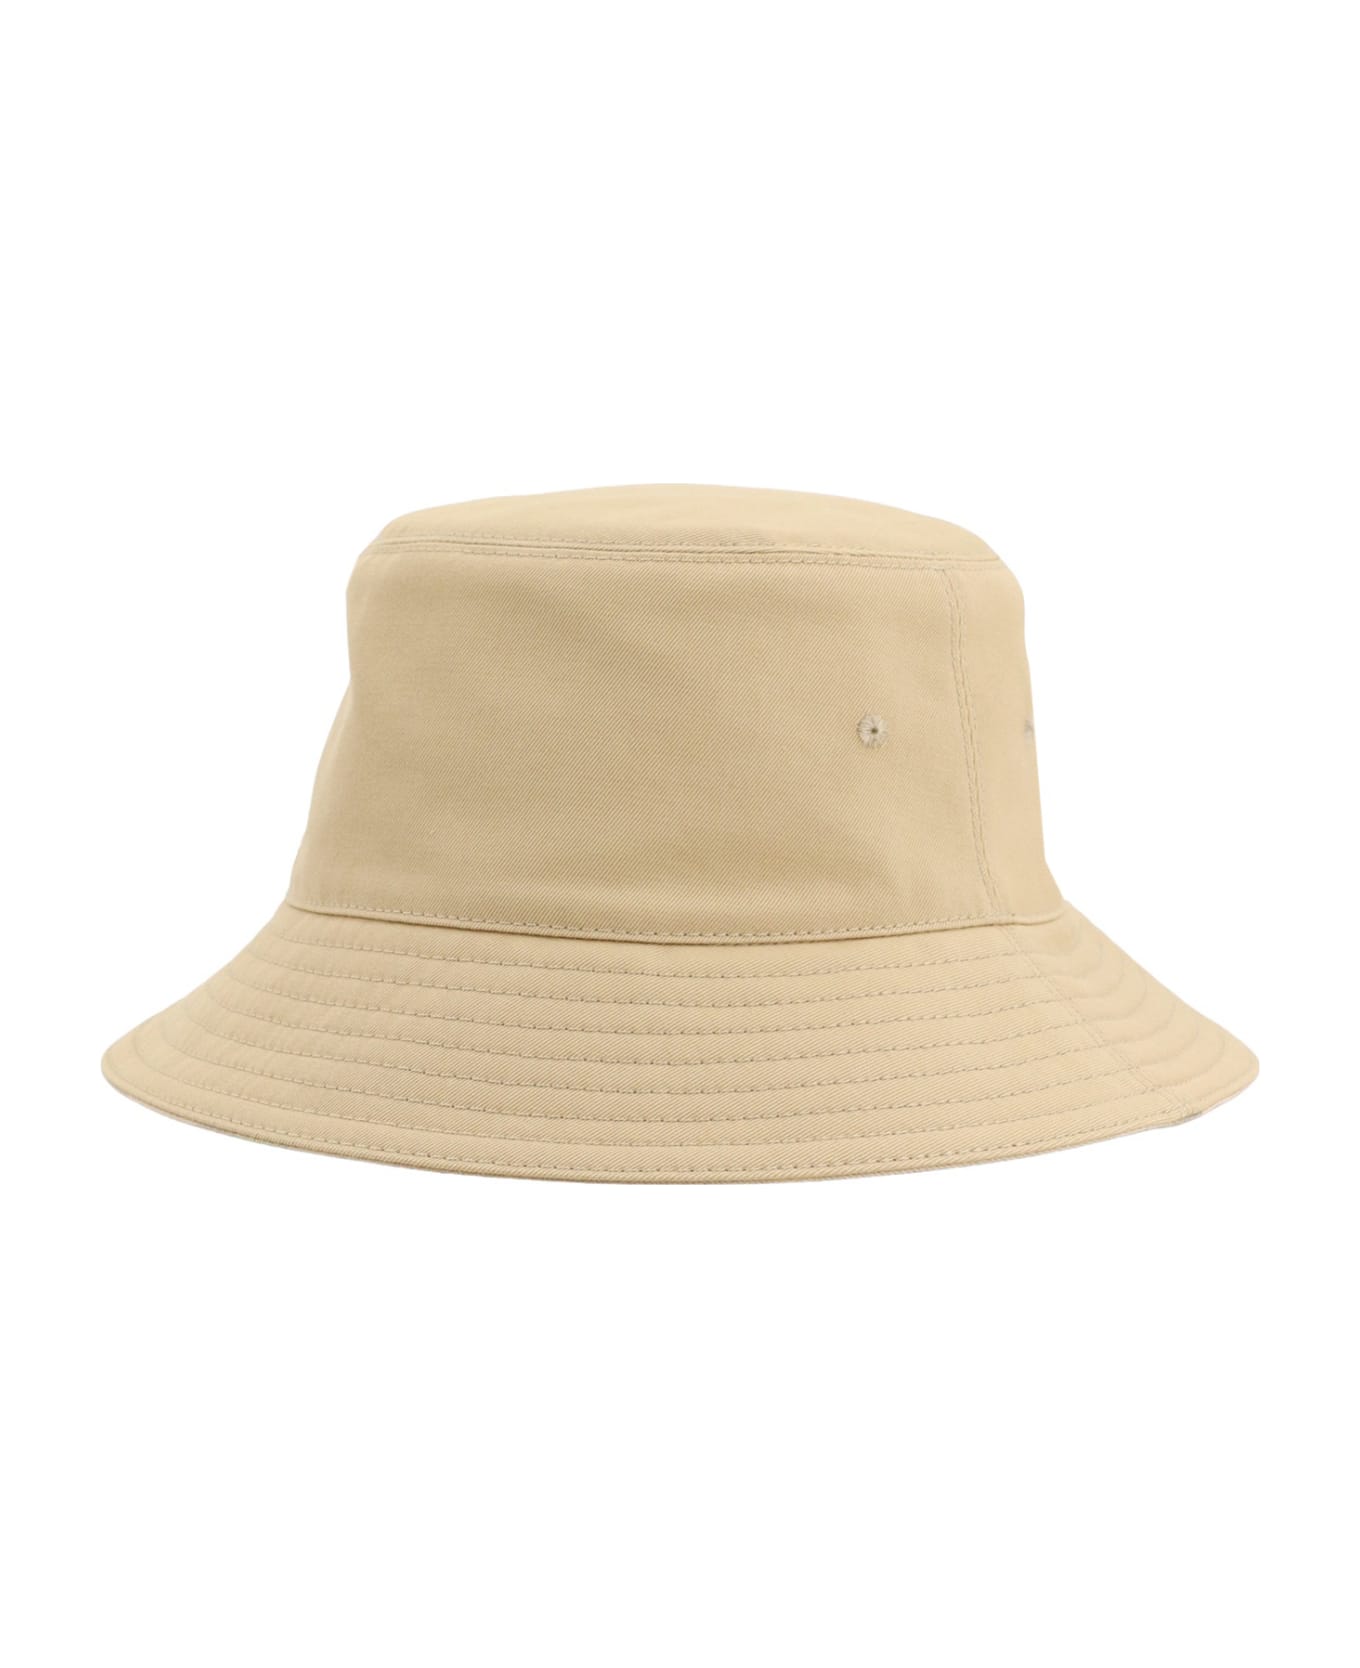 Burberry Check-pattern Reversible Pull-on Bucket Hat - Beige